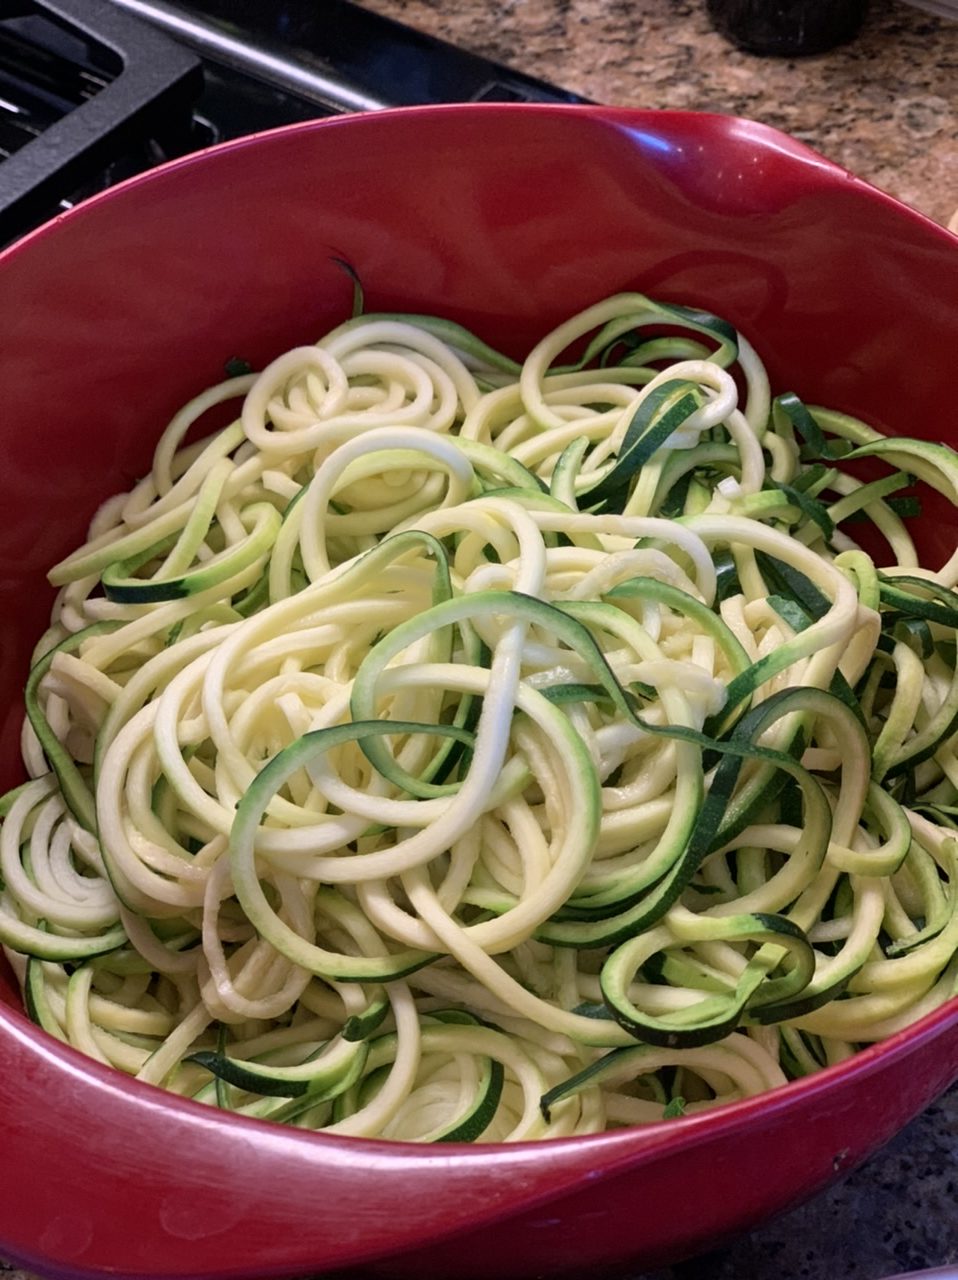 Zoodles made from zucchini